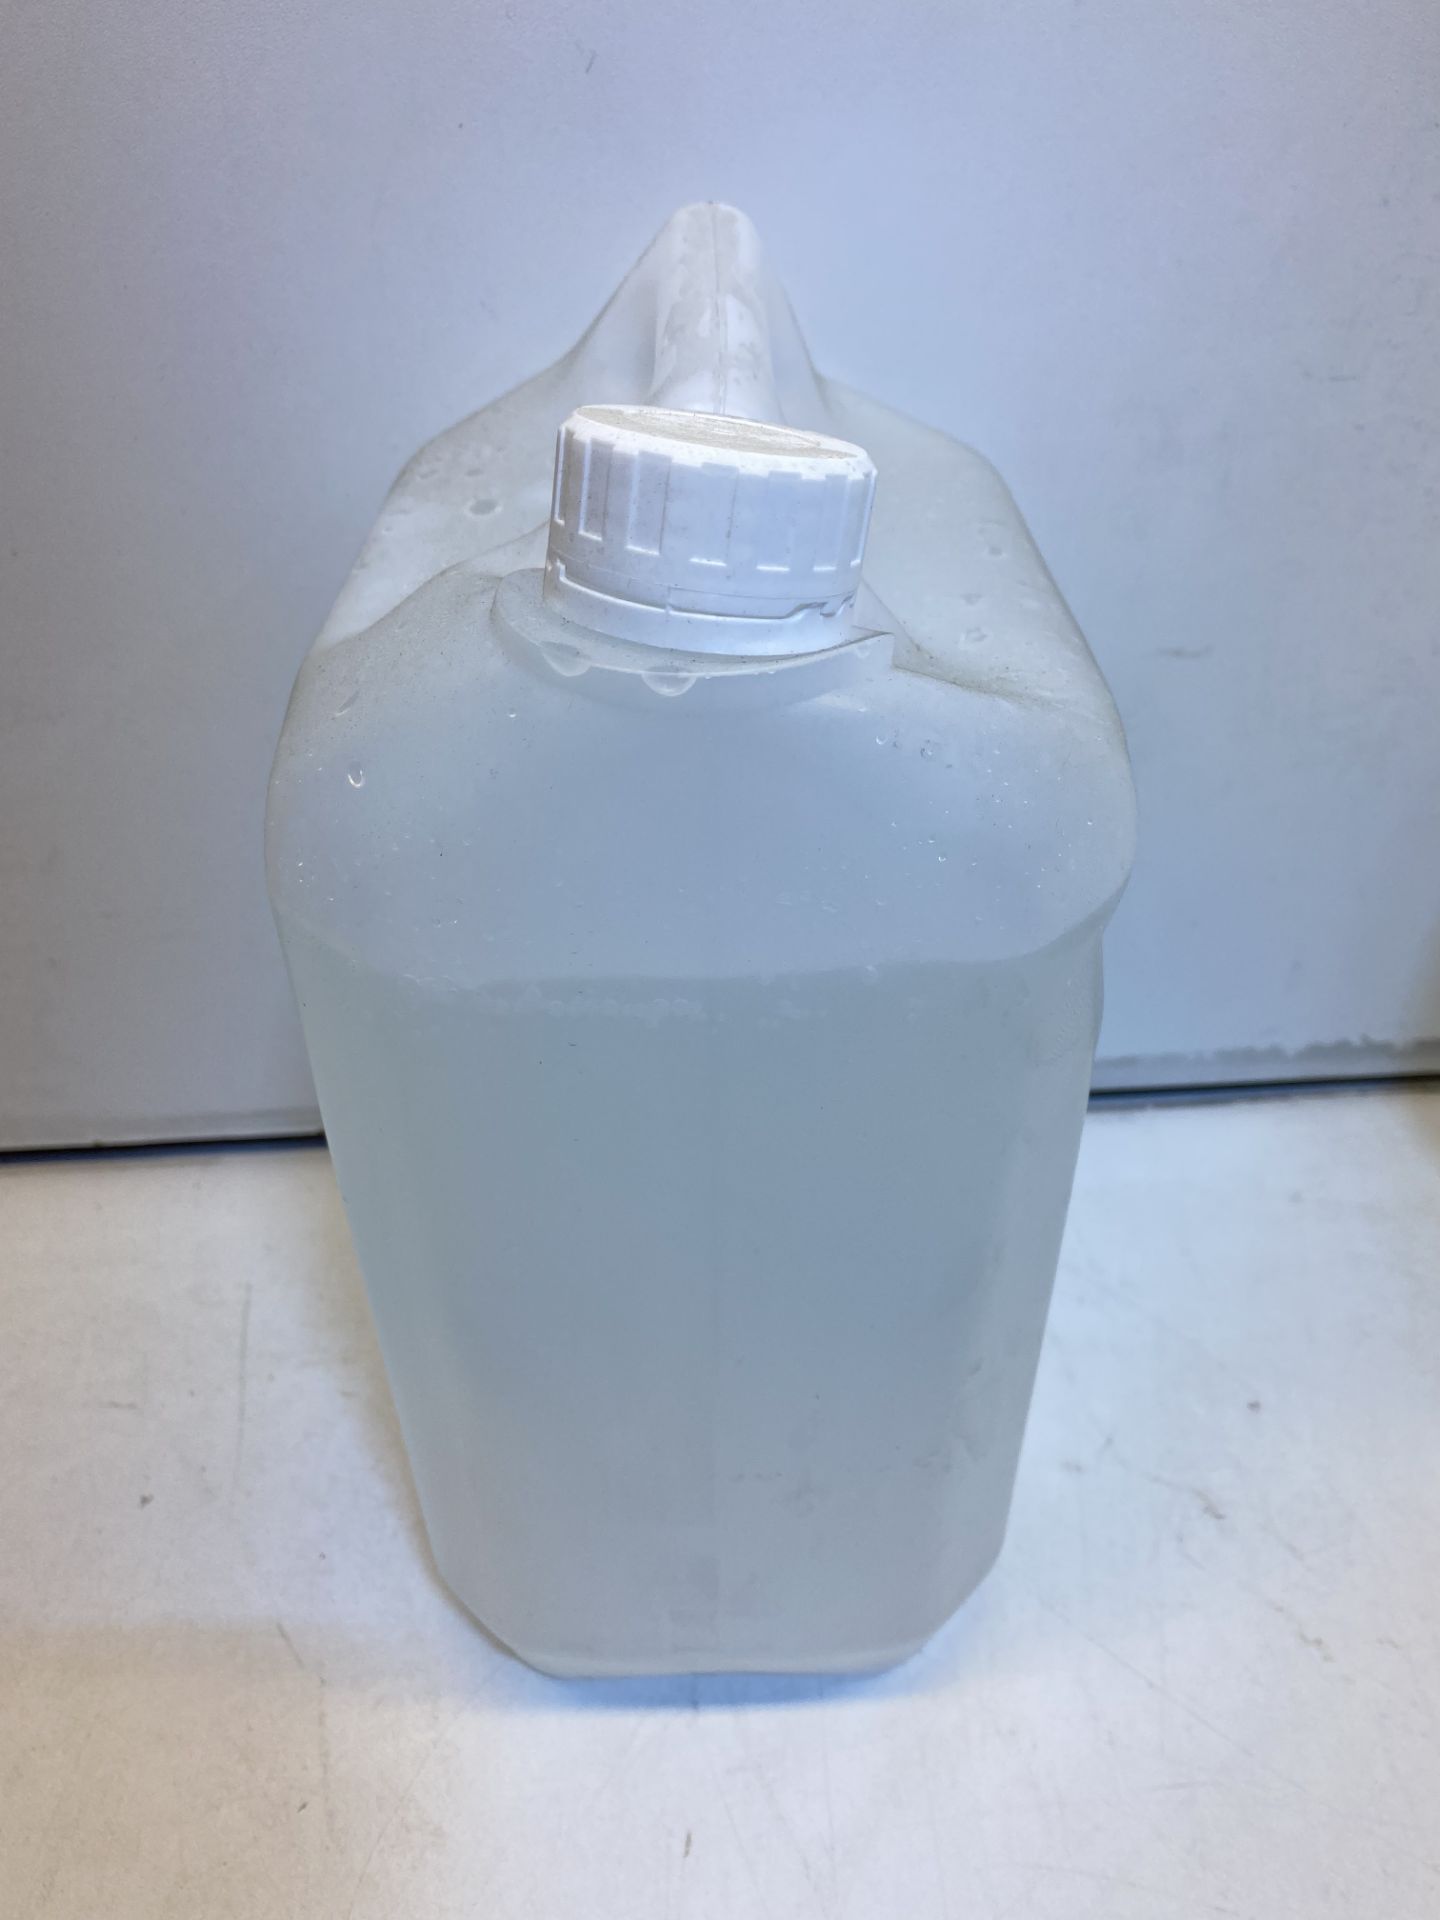 2 x 5LTR Bottles Of Advanced Hand & Hard Surface Disinfectant - Image 3 of 3